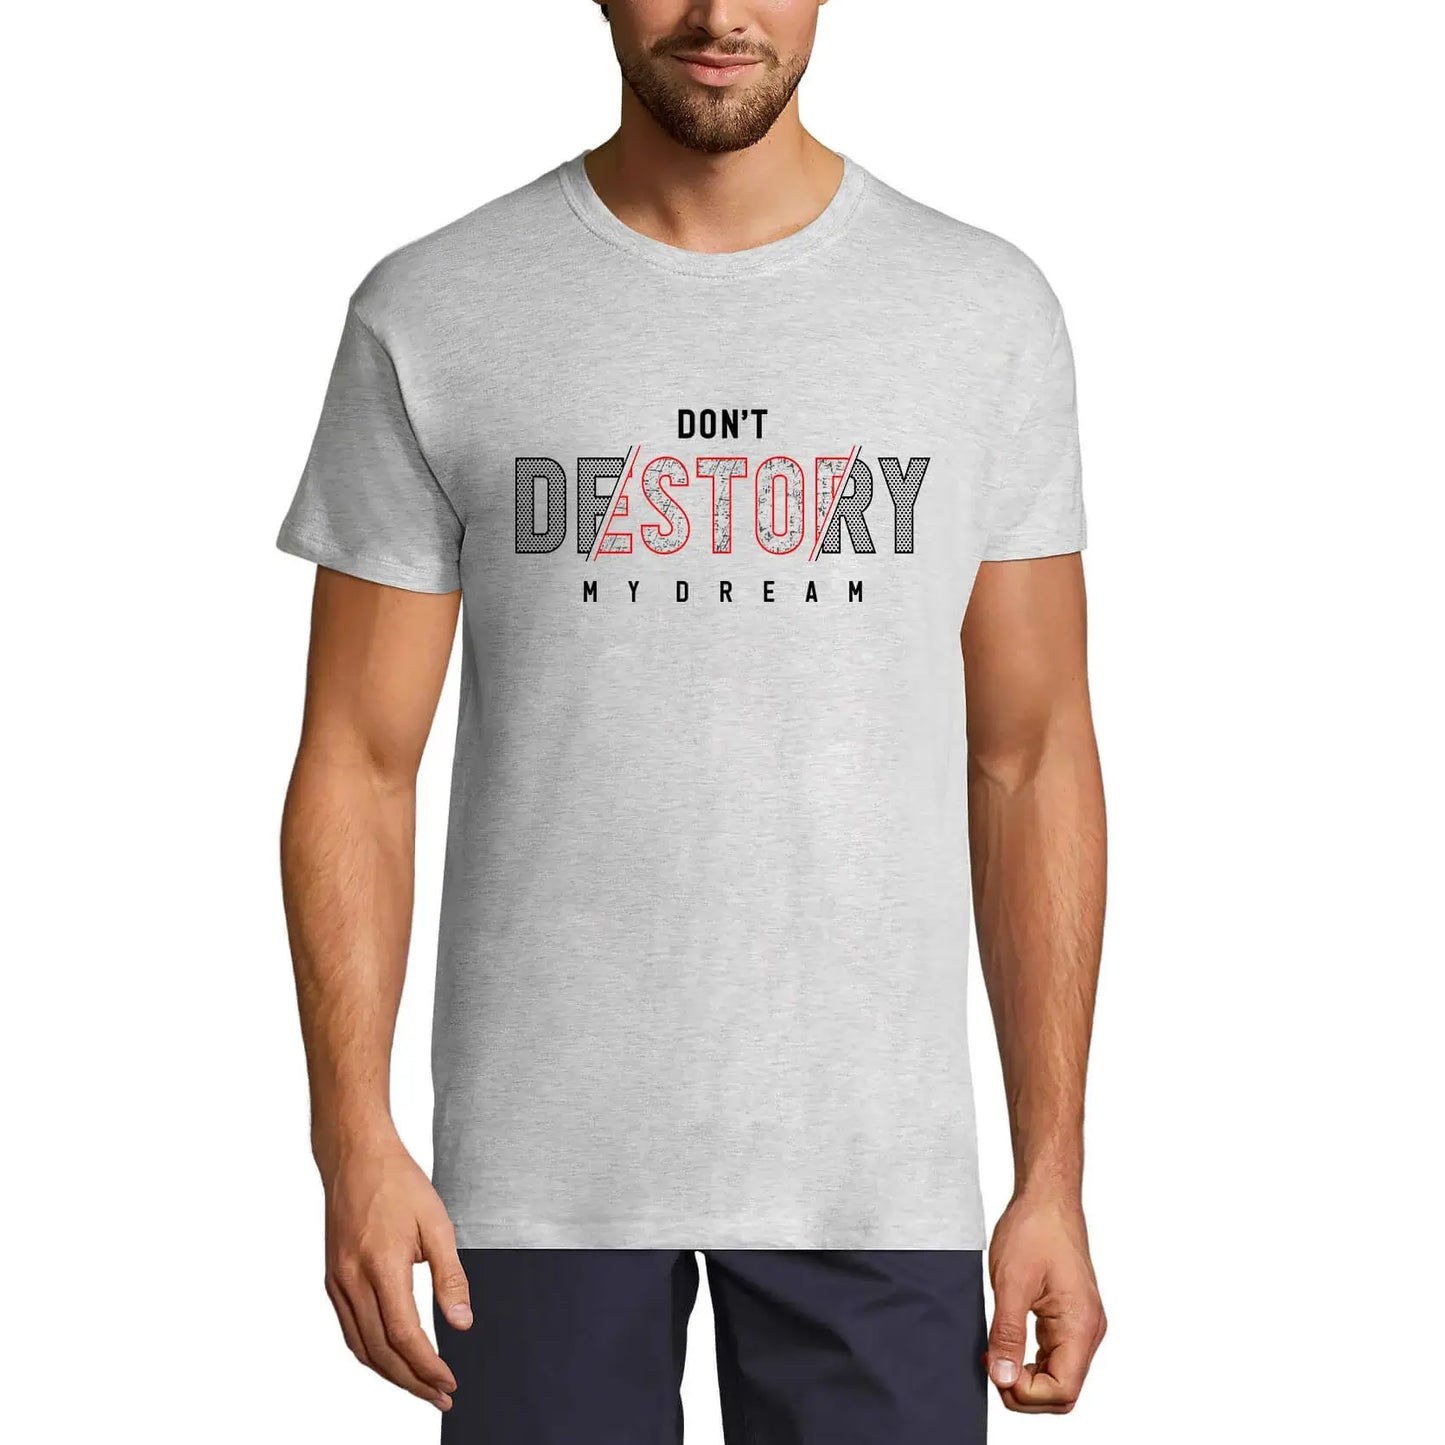 Men's Graphic T-Shirt Don't Destroy My Dream Eco-Friendly Limited Edition Short Sleeve Tee-Shirt Vintage Birthday Gift Novelty